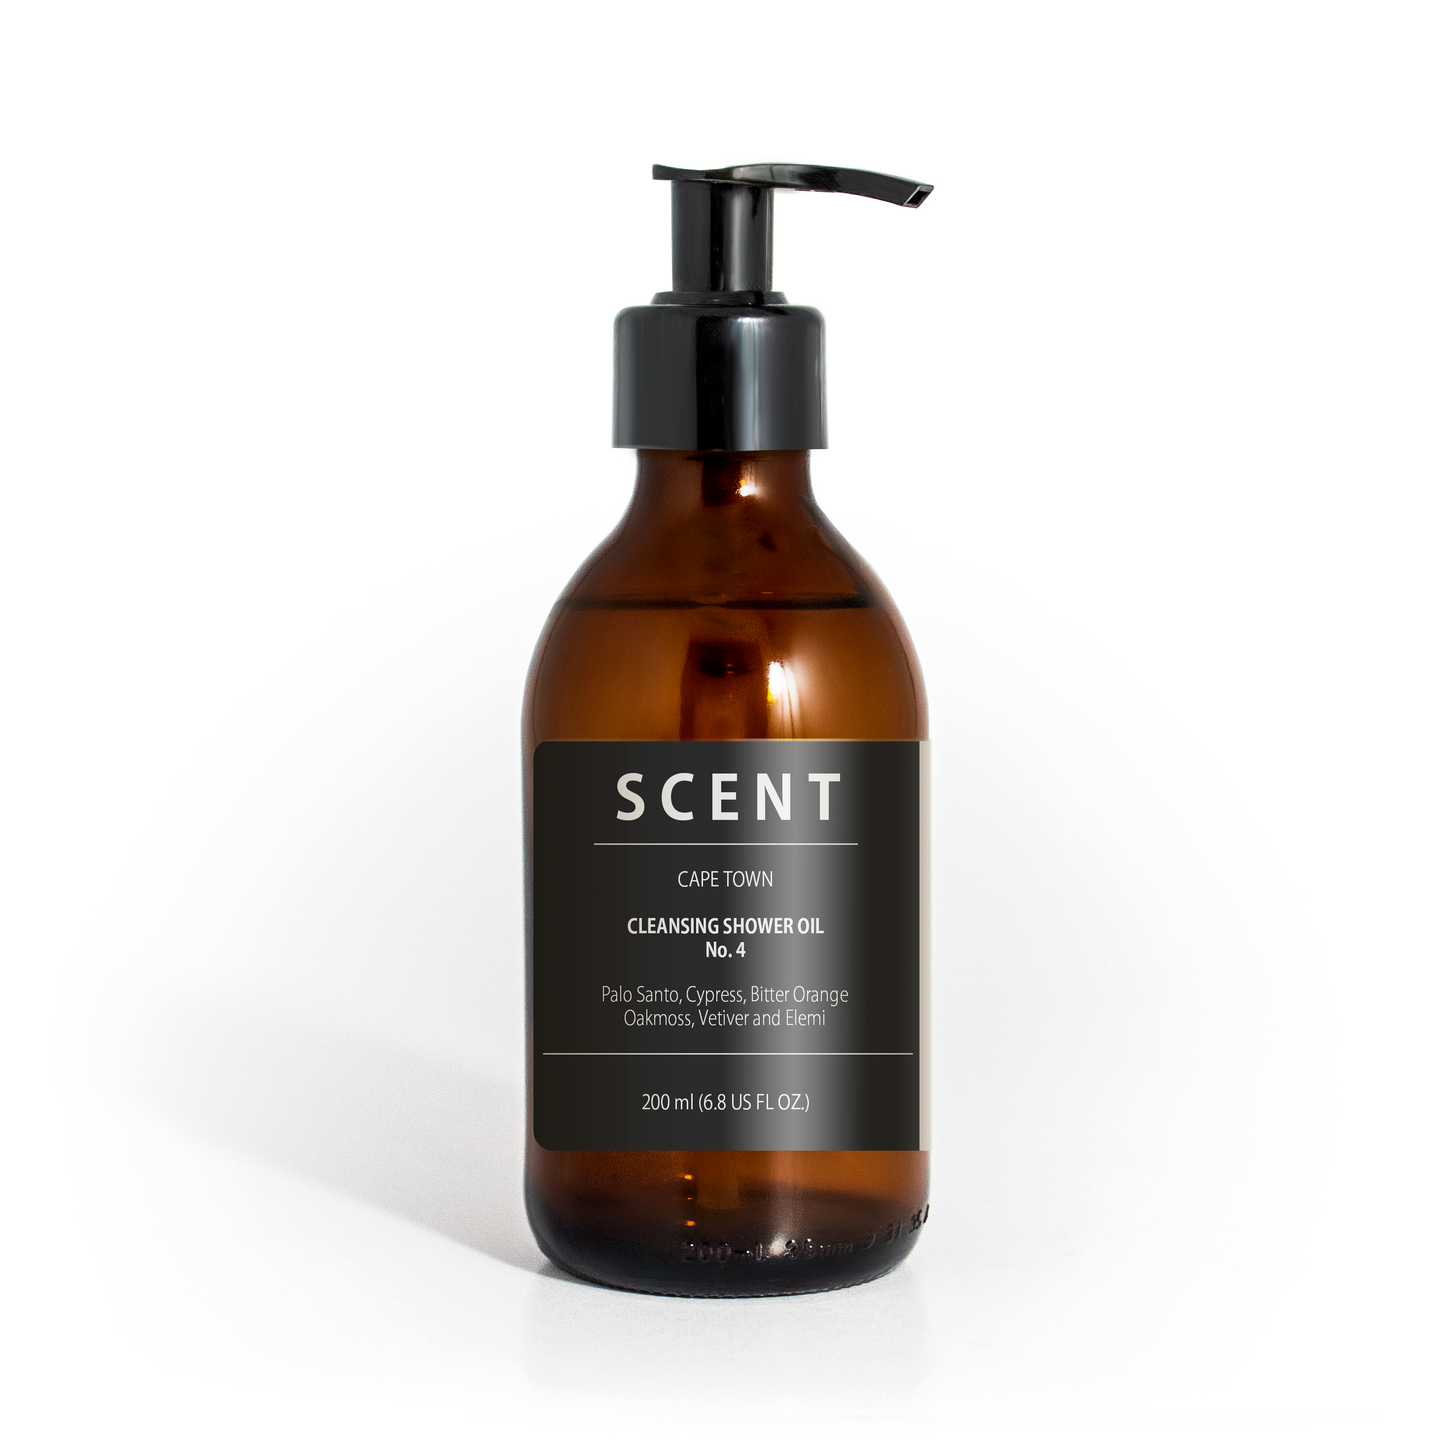 SCENT Cleansing Shower Oil